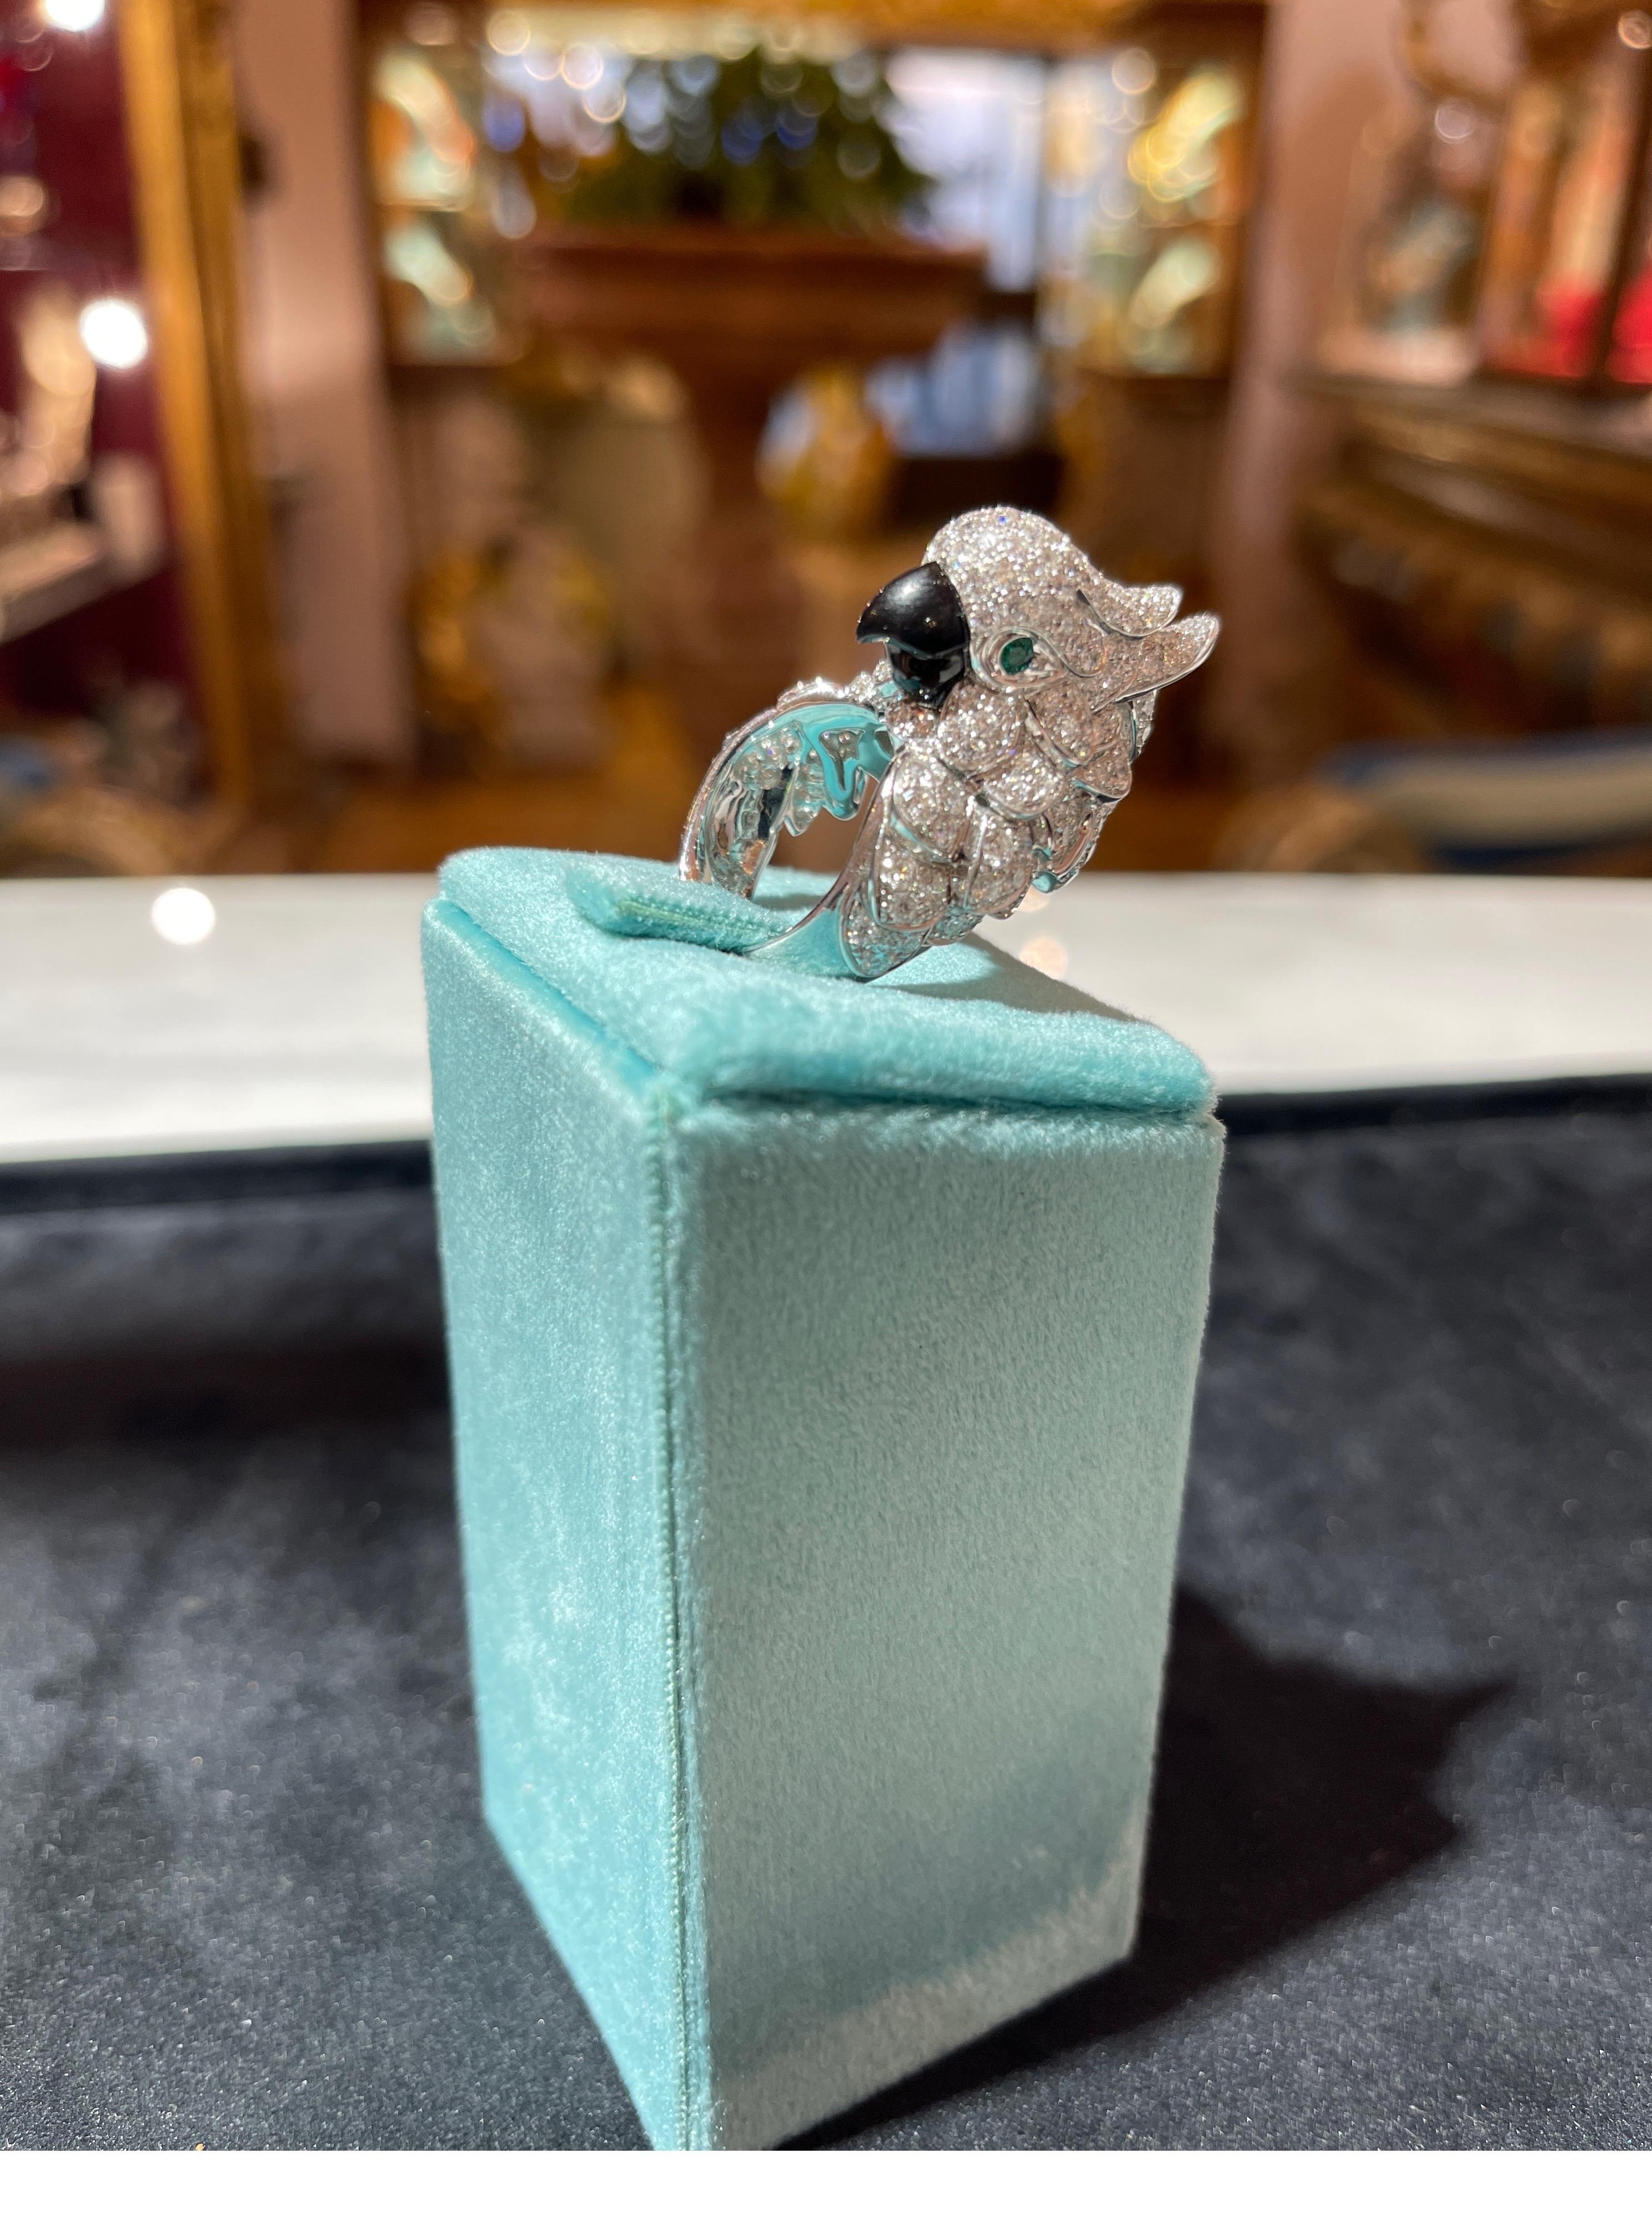 Marvelous parrot-shaped ring in 18ct white gold treaded with diamonds (4.07ct) and with two emerald eyes (0.10ct) the beak is a piece of carved onyx